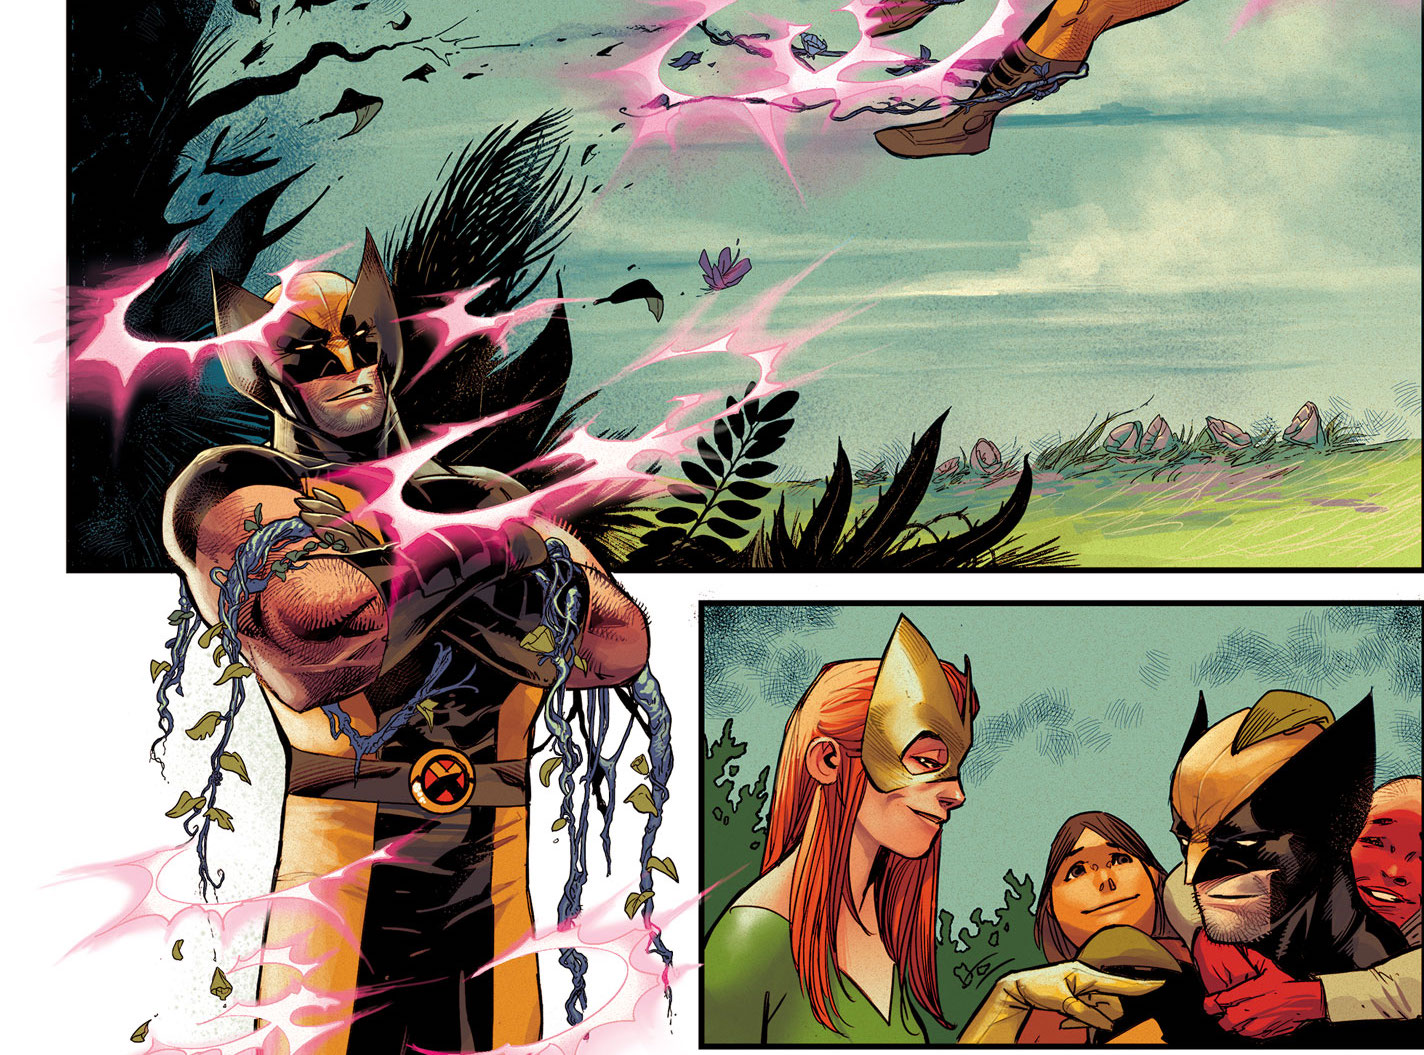 EXCLUSIVE First Look: Wolverine #1 interior art colored by Frank Martin